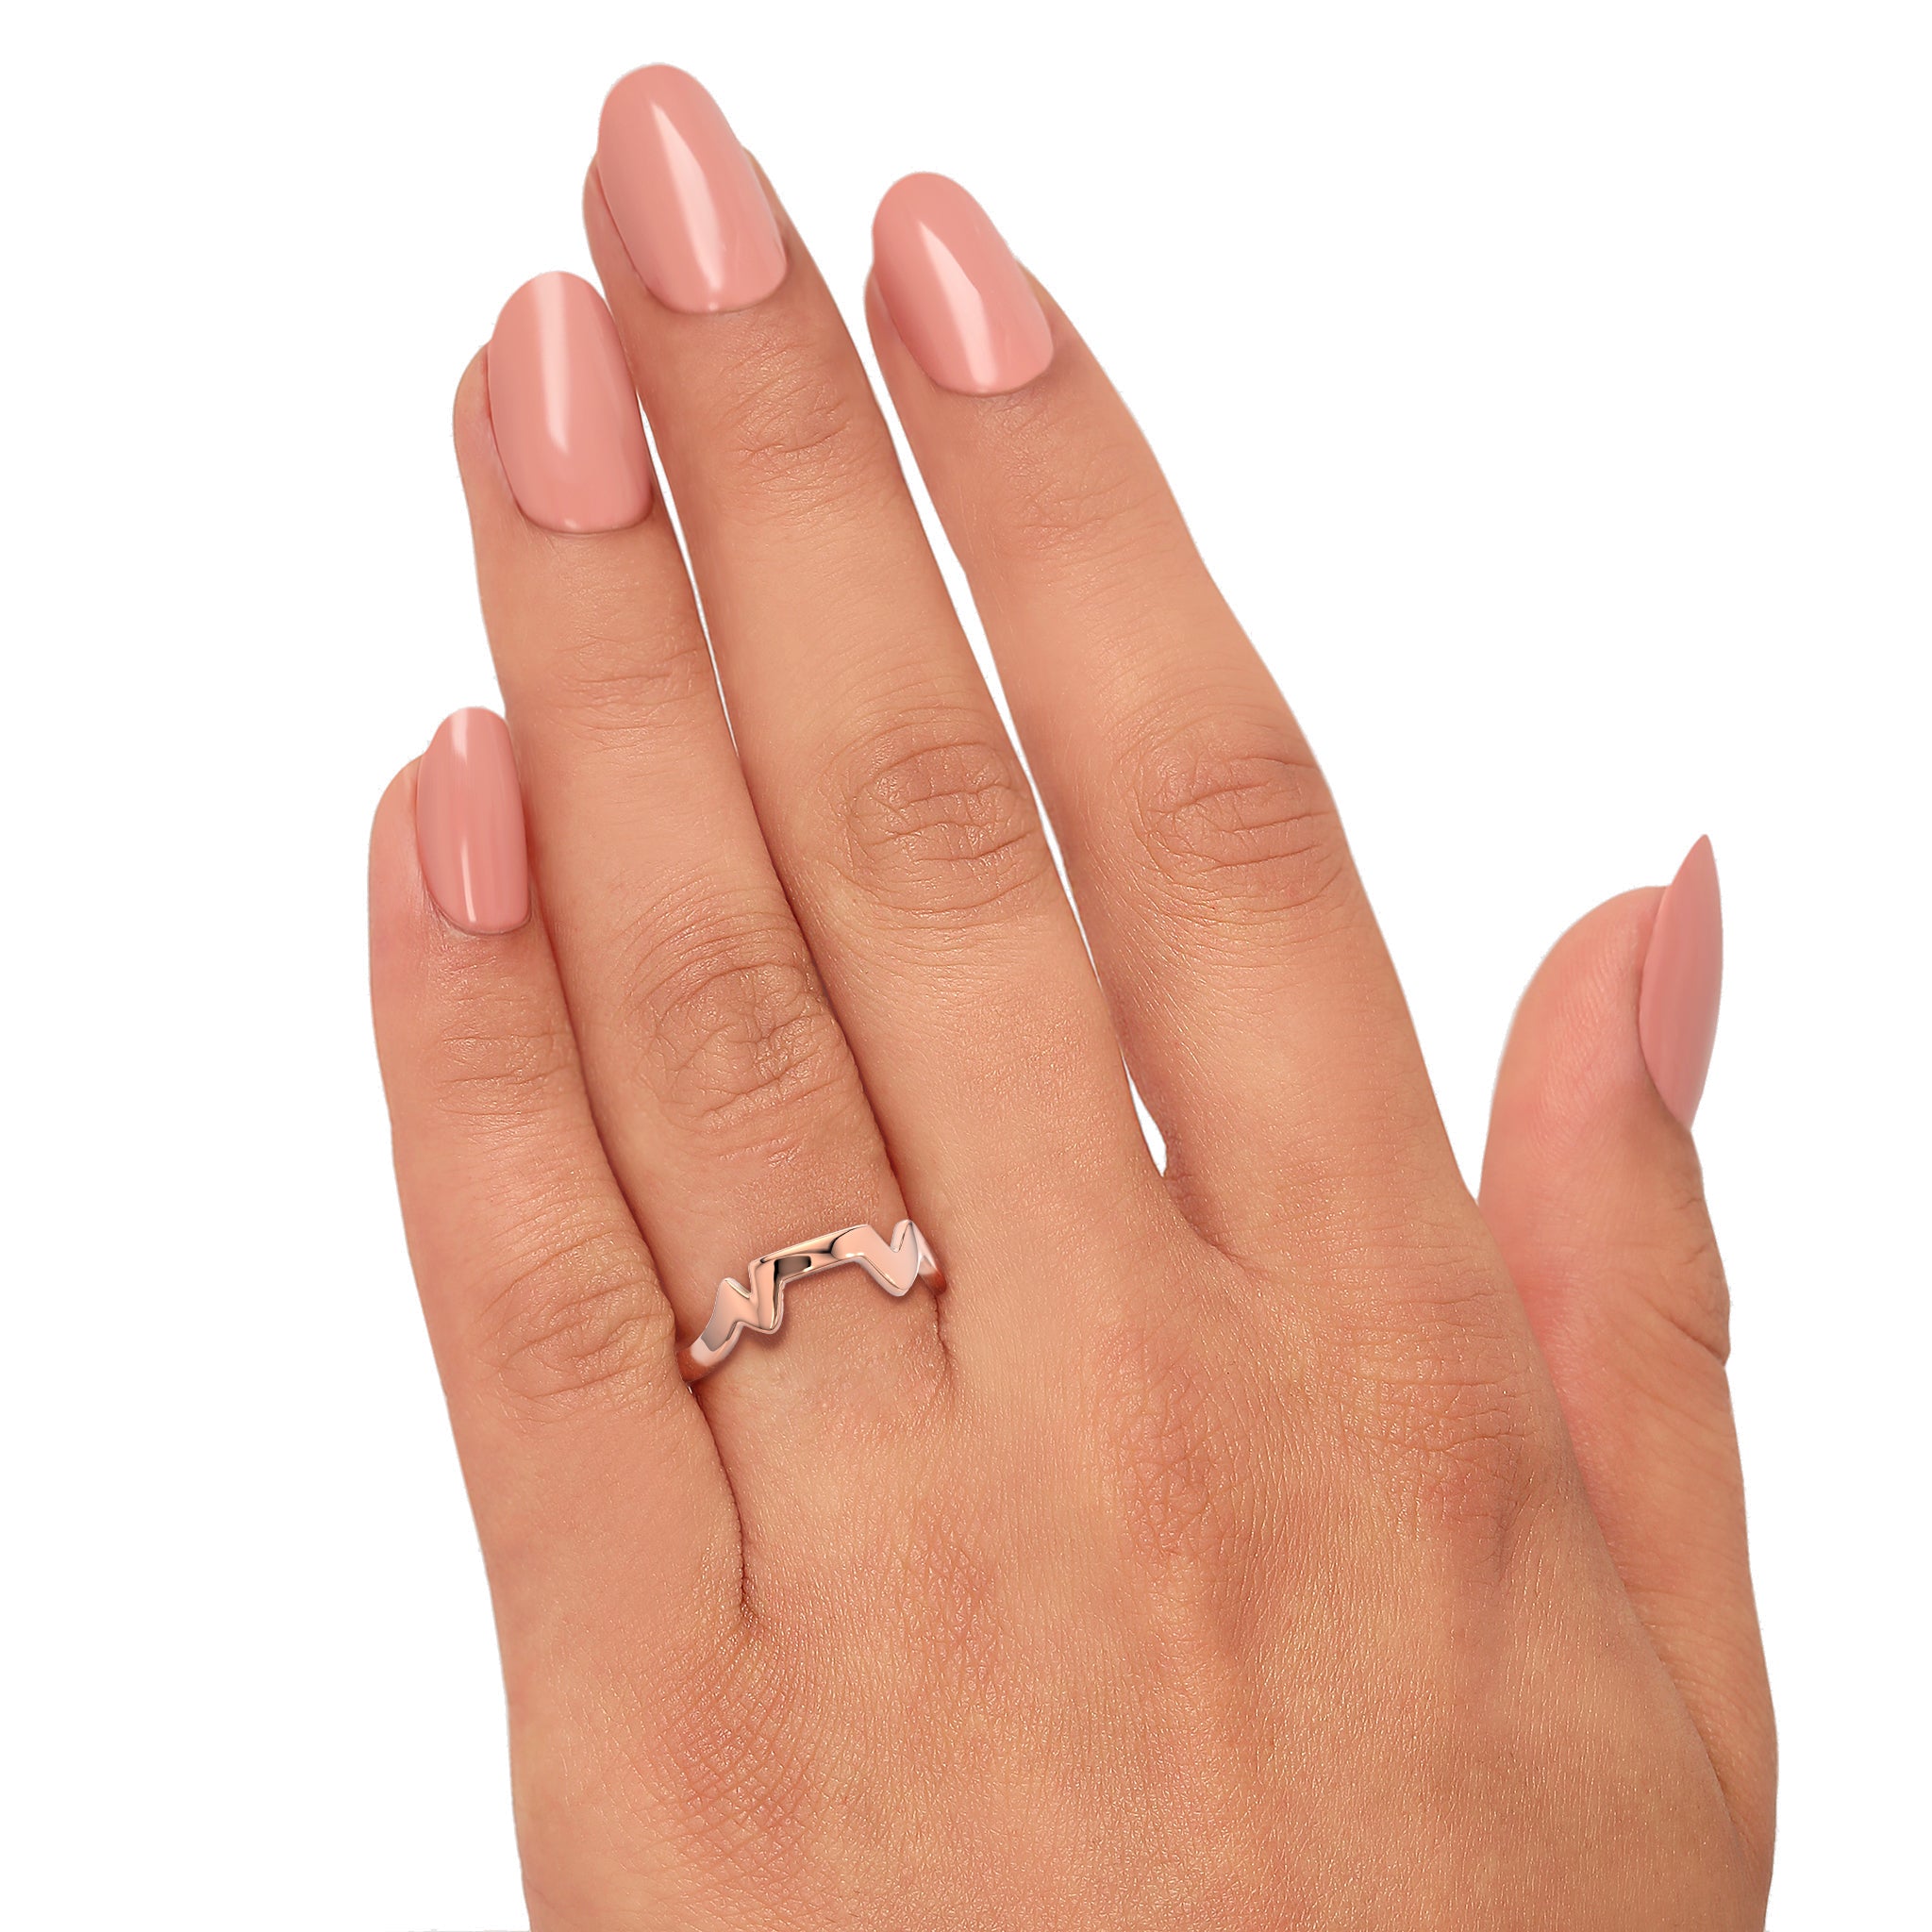 Shimansky - Women Wearing the Table Mountain Ring Crafted in 14K Rose Gold